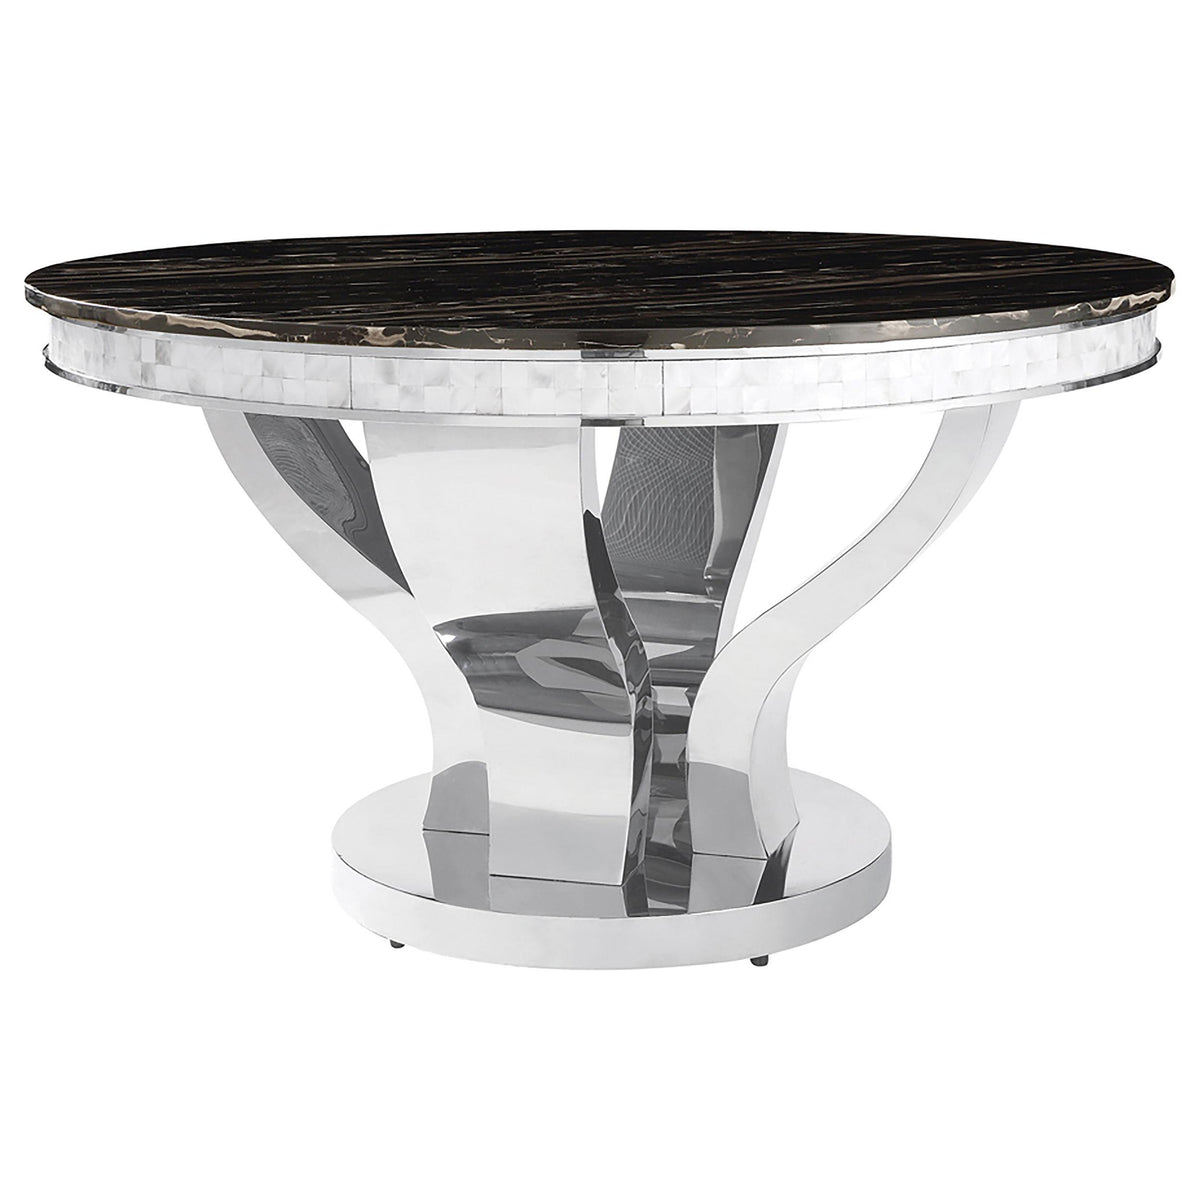 Anchorage Round Dining Table Chrome and Black  Half Price Furniture